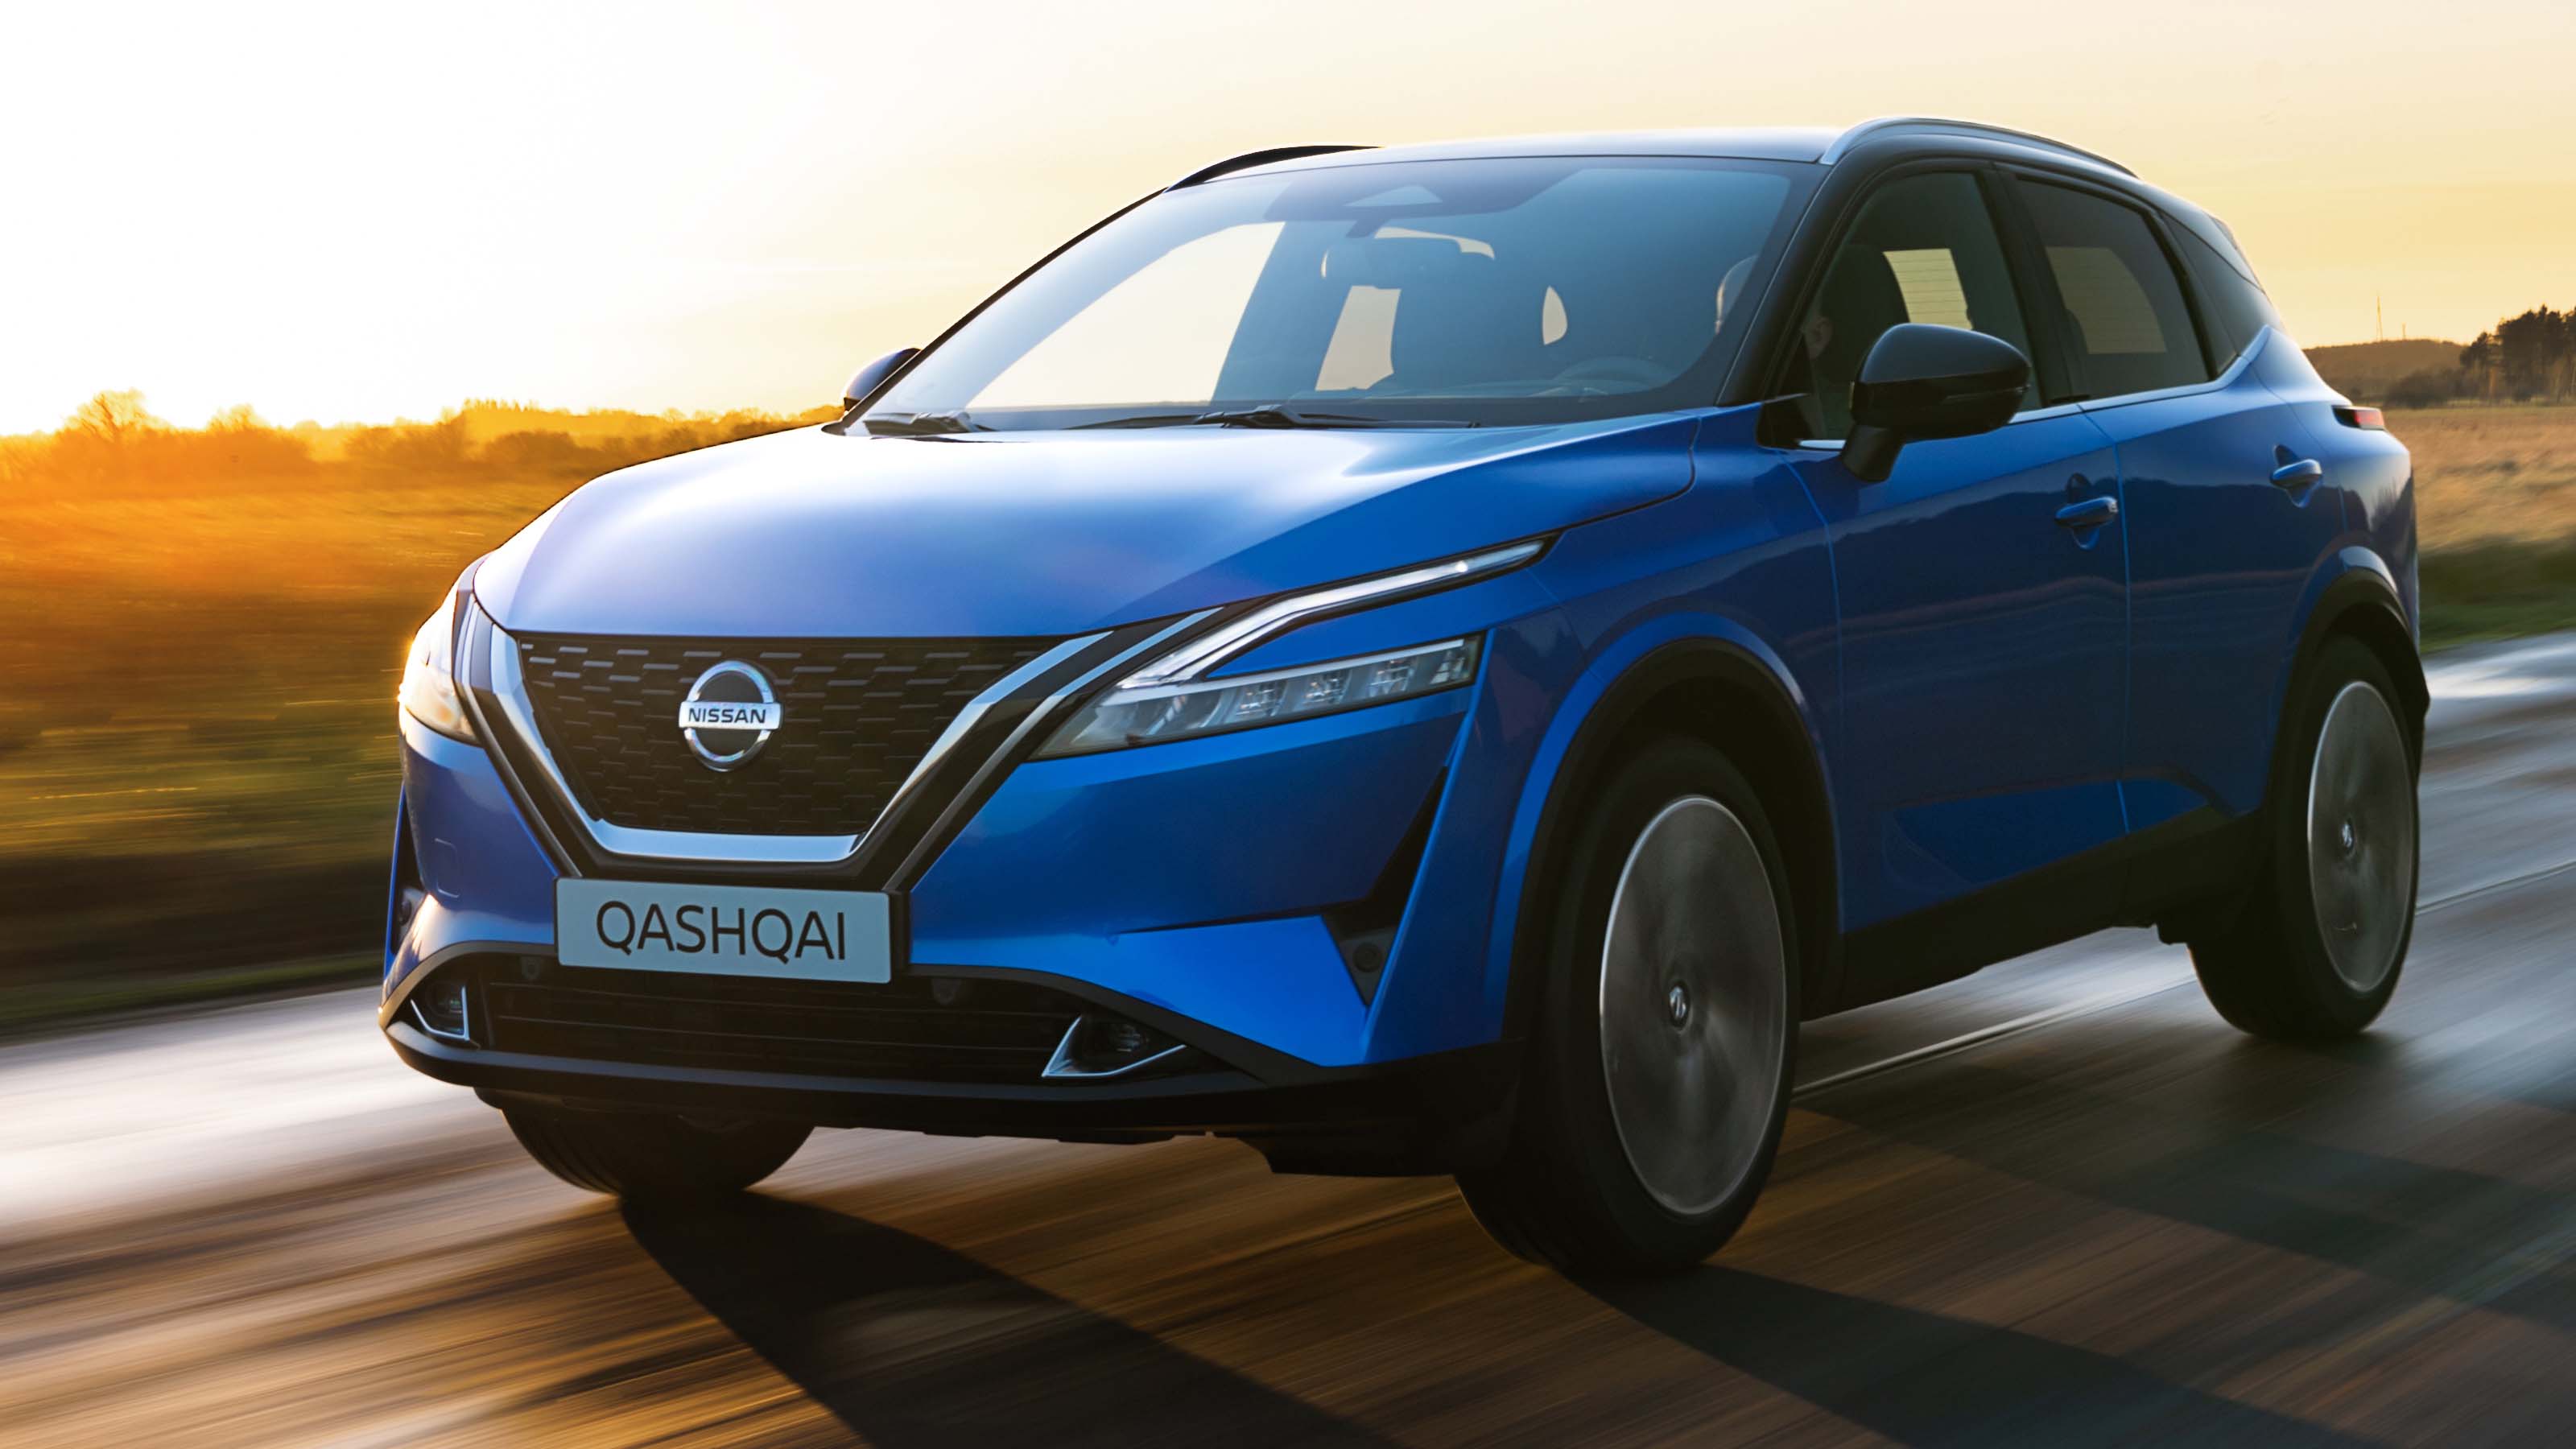 New Nissan Qashqai hybrid crossover debuts for Europe, previews